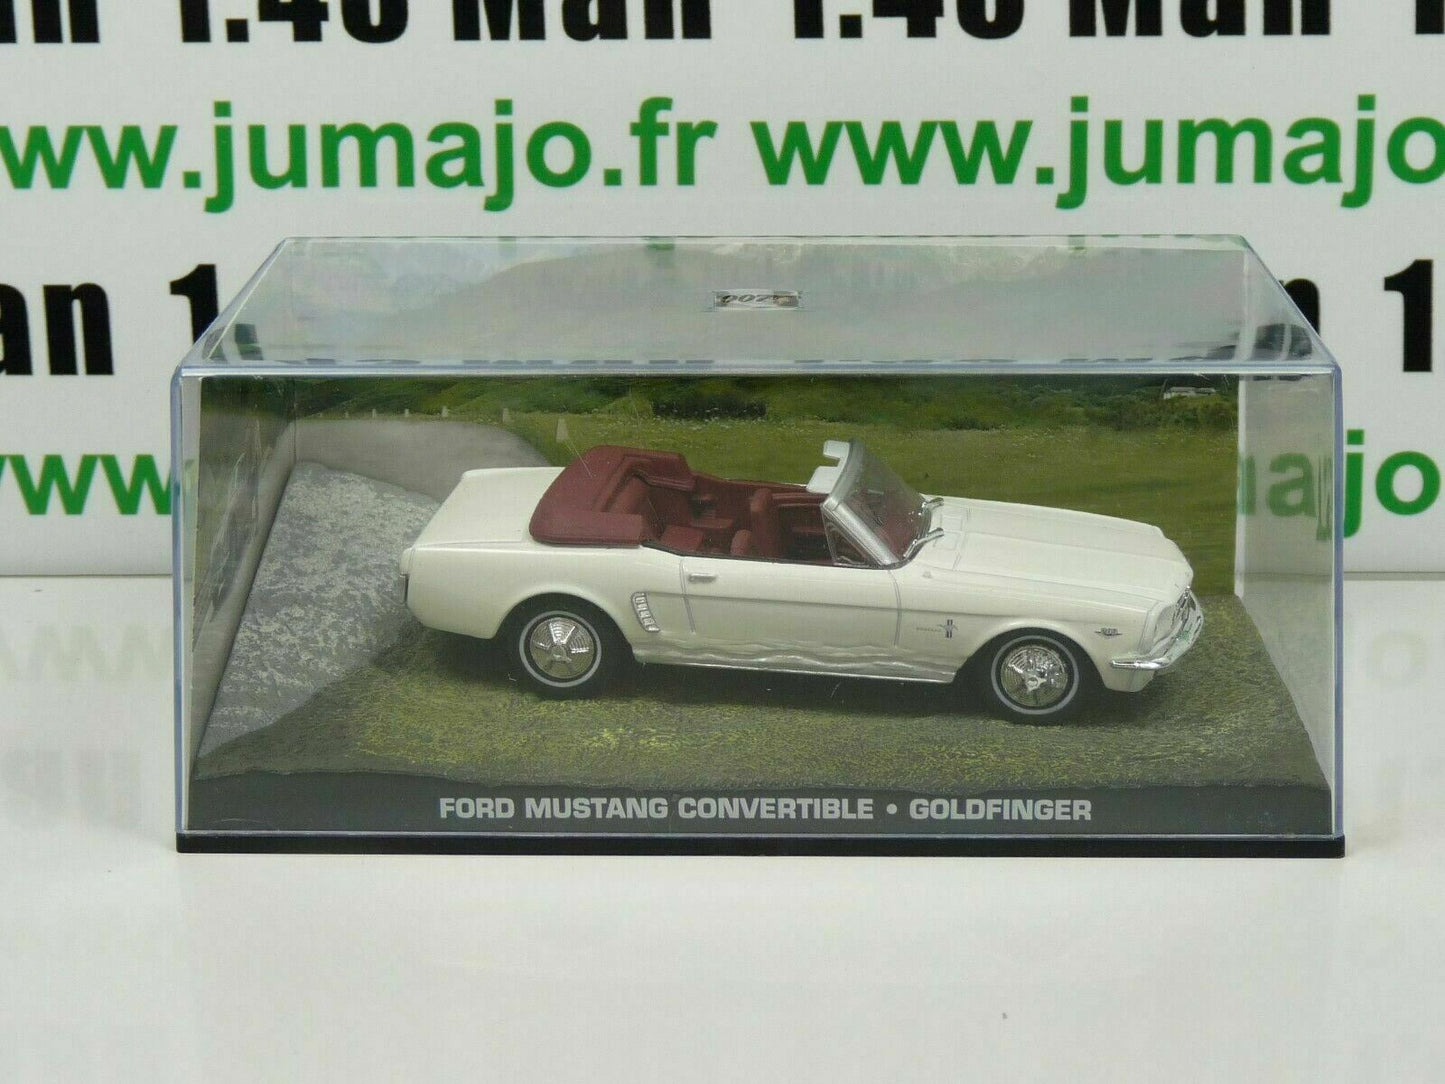 JB35 voiture 1/43 IXO 007 JAMES BOND : FORD MUSTANG Convertible blanche